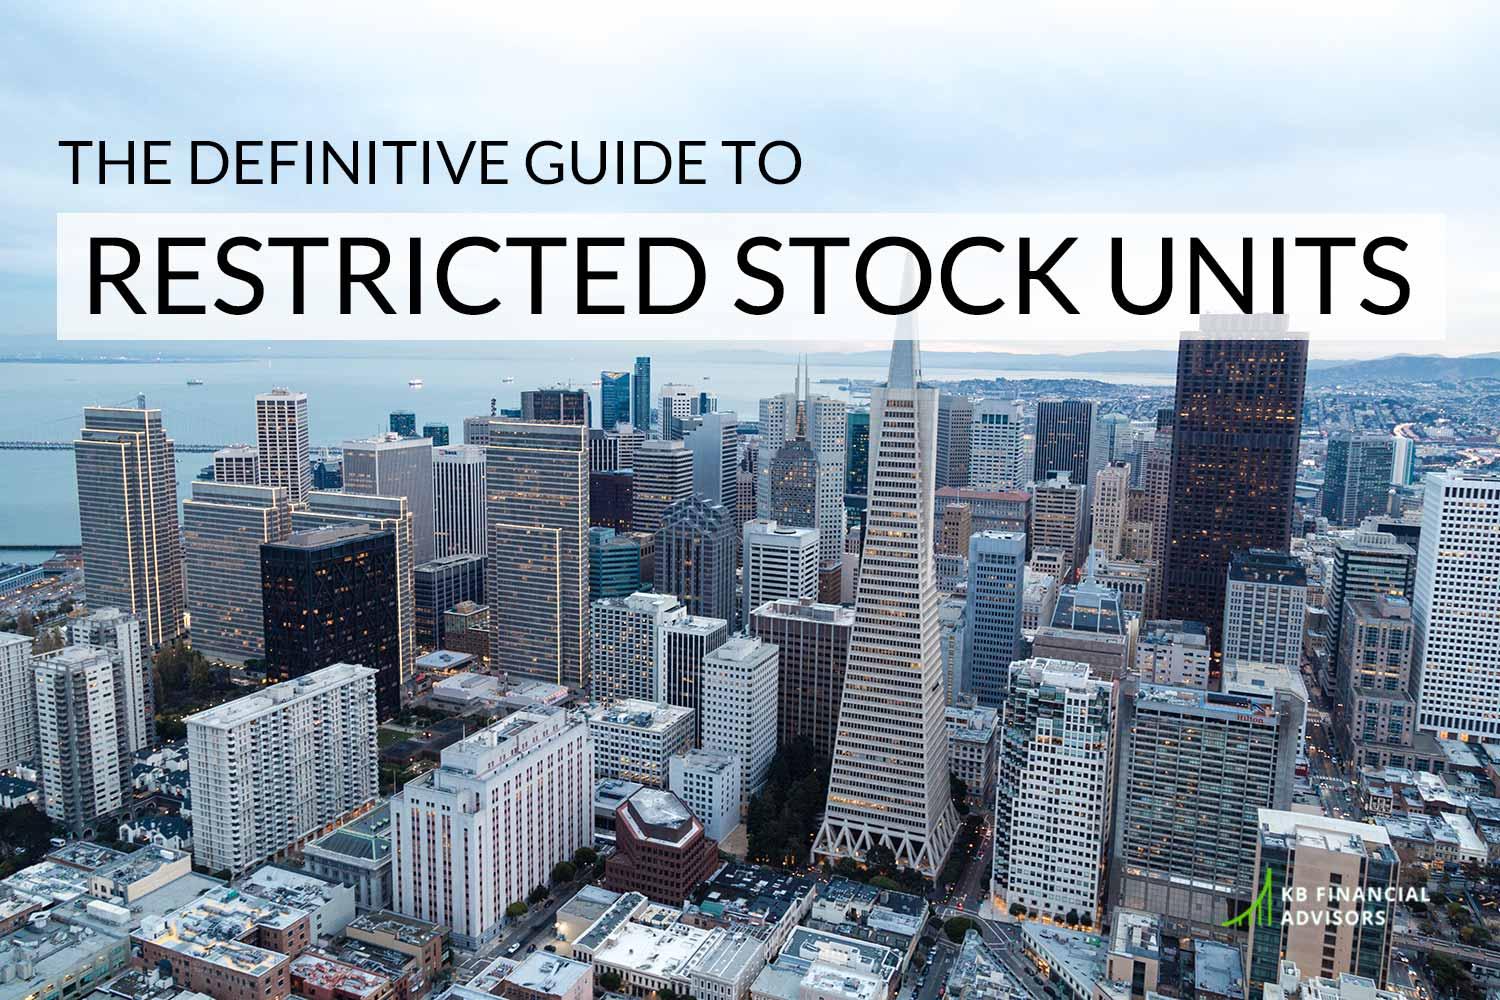 The Definitive Guide to Restricted Stock Units